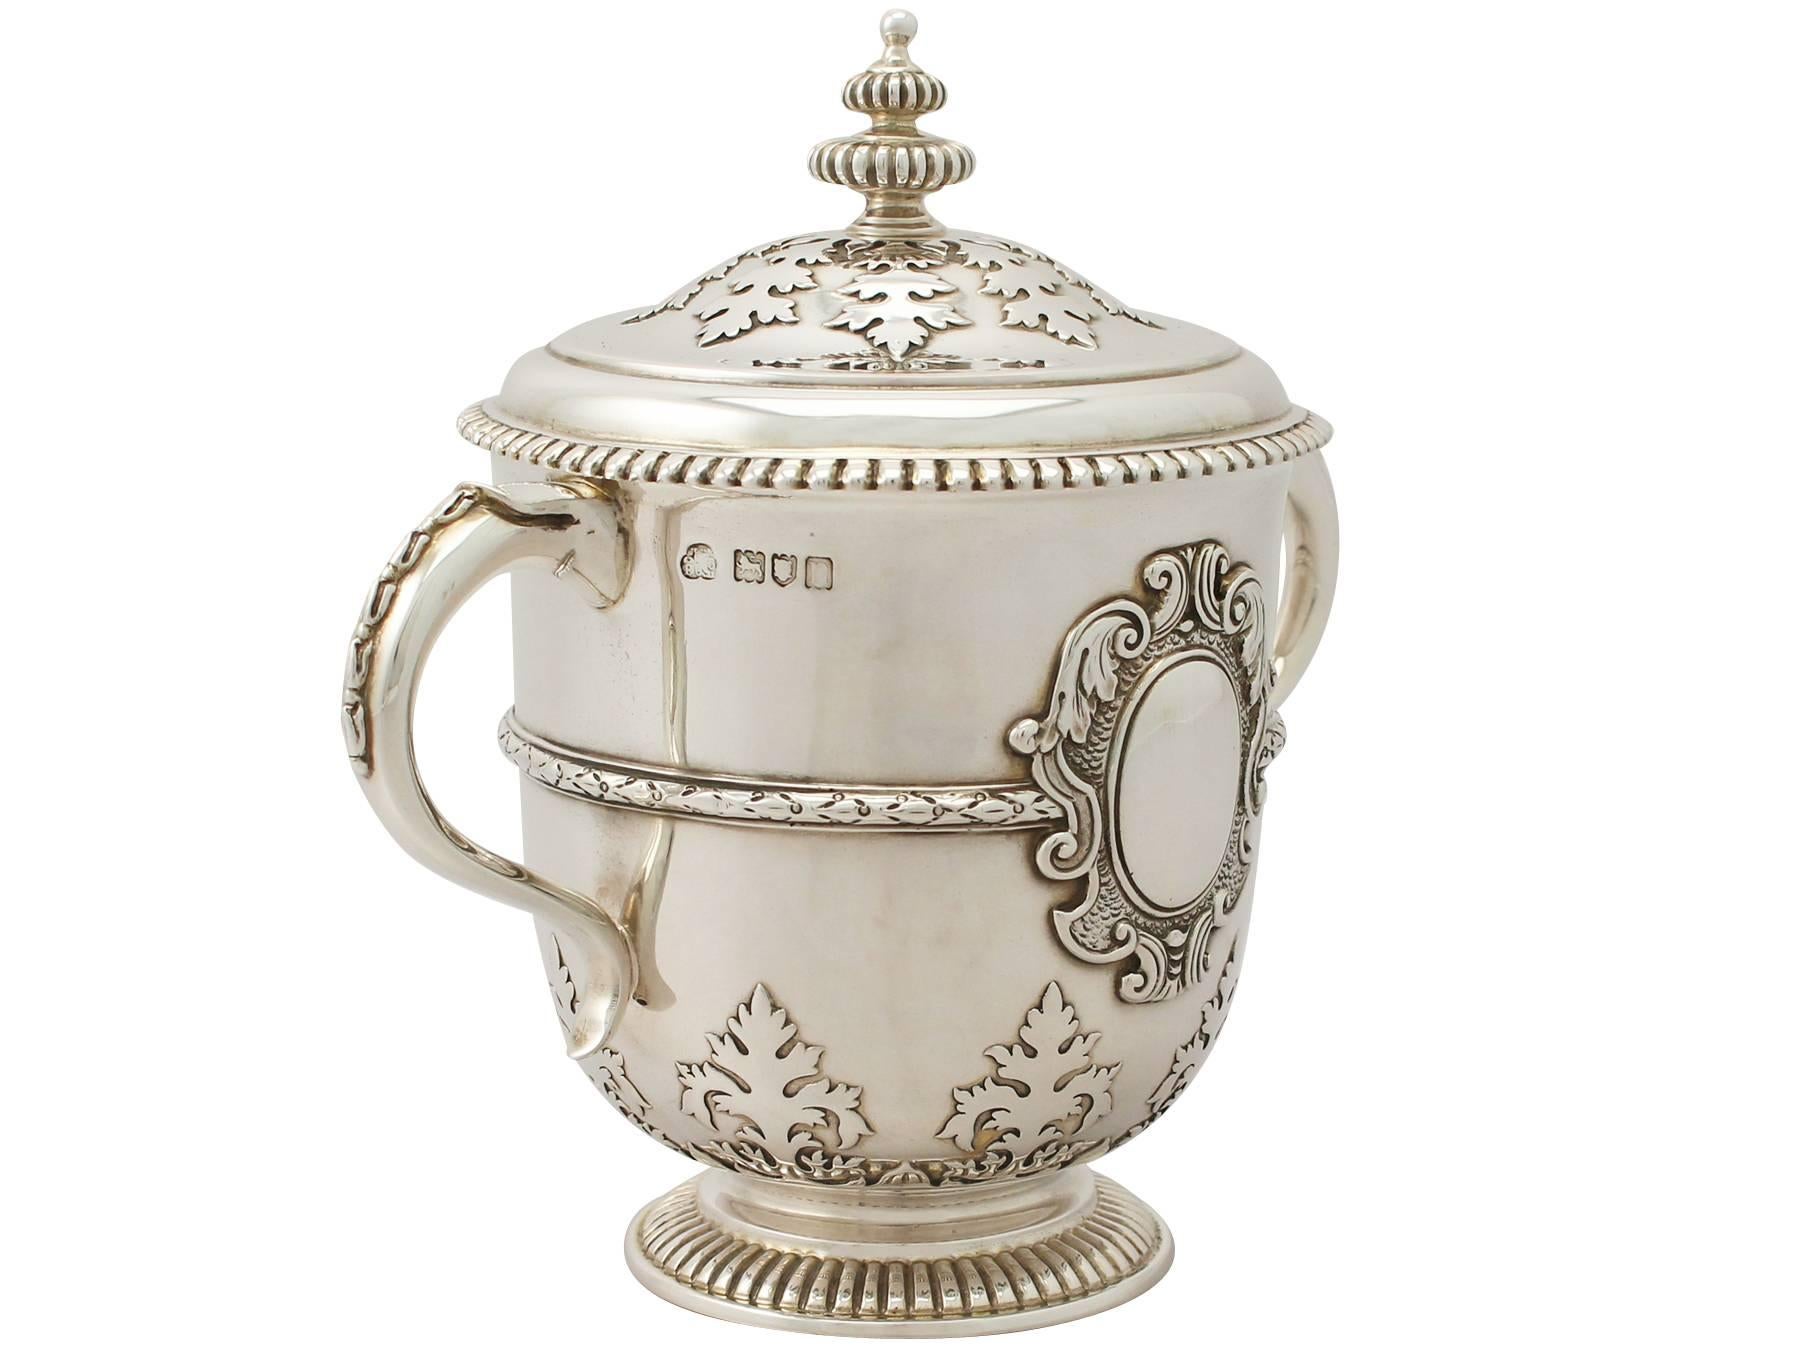 An exceptional, fine and impressive antique Edwardian English sterling silver cup and cover; an addition to our silver presentation collection.

This exceptional antique Edwardian sterling silver cup and cover has a circular bell shaped form onto